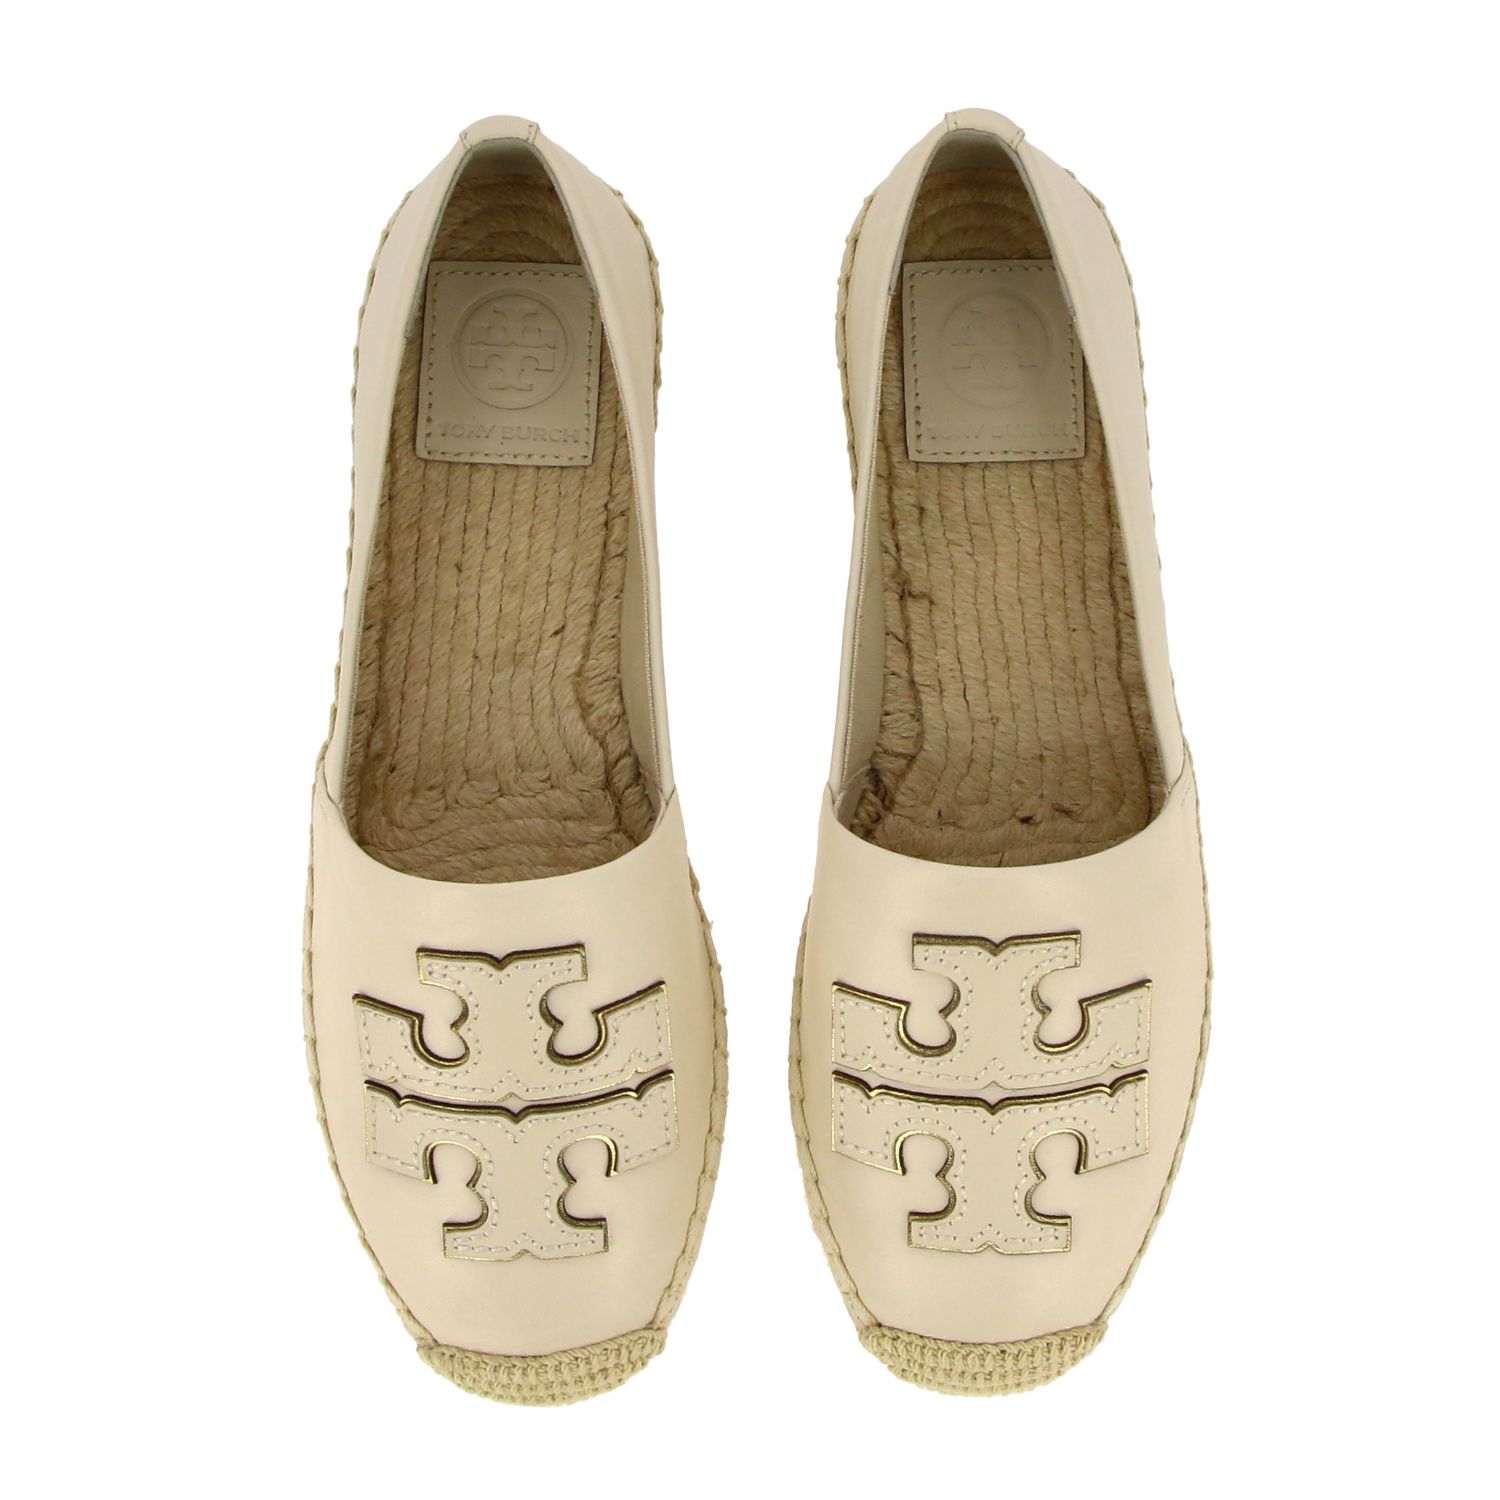 Tory Burch Outlet: Ines espadrilles in nappa leather with emblem ...